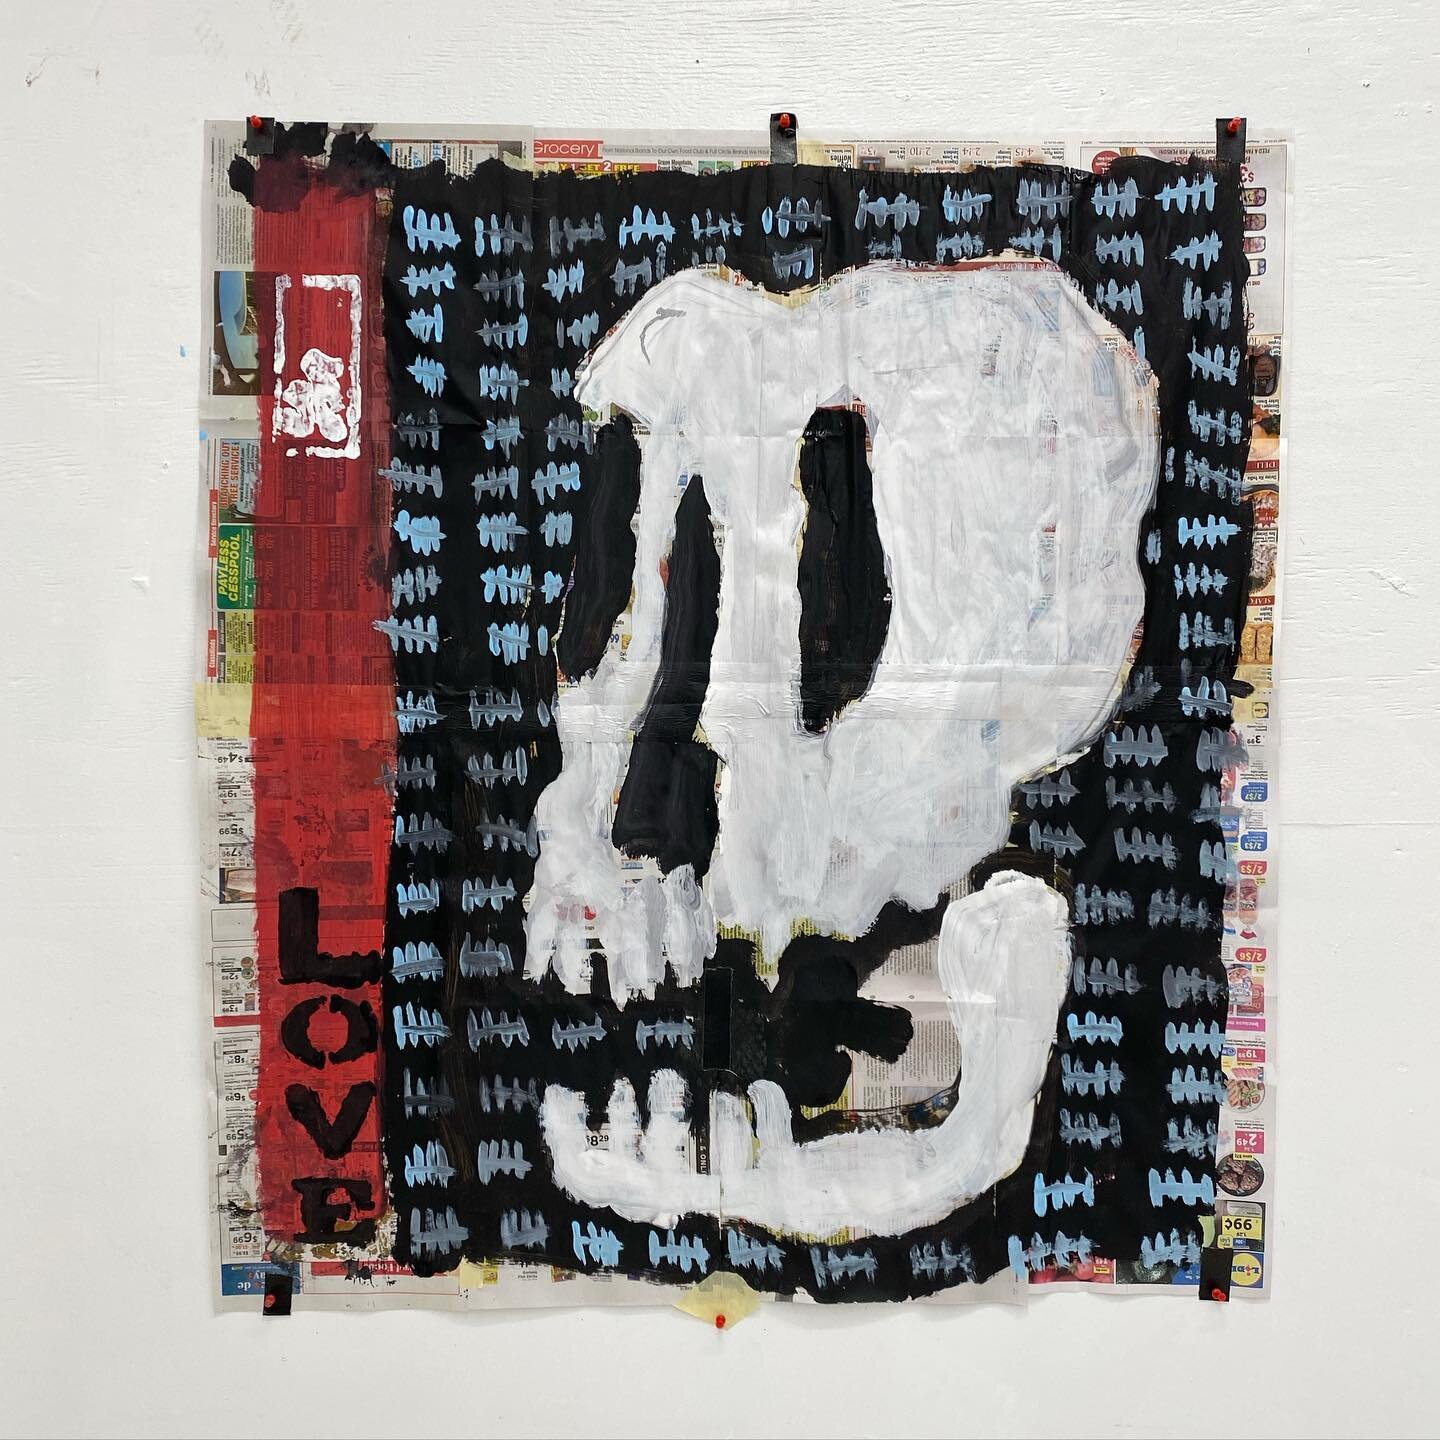 Available!! $300 includes postage - LOVE - 37&rdquo;W x 39&rdquo;H - acrylic on newspaper and tape - Dm me to purchase !!! 
.
..
#jamesgreco #artcollectors #paintingforsale #worksonpaper #love #skull #la #nyc #hamptons